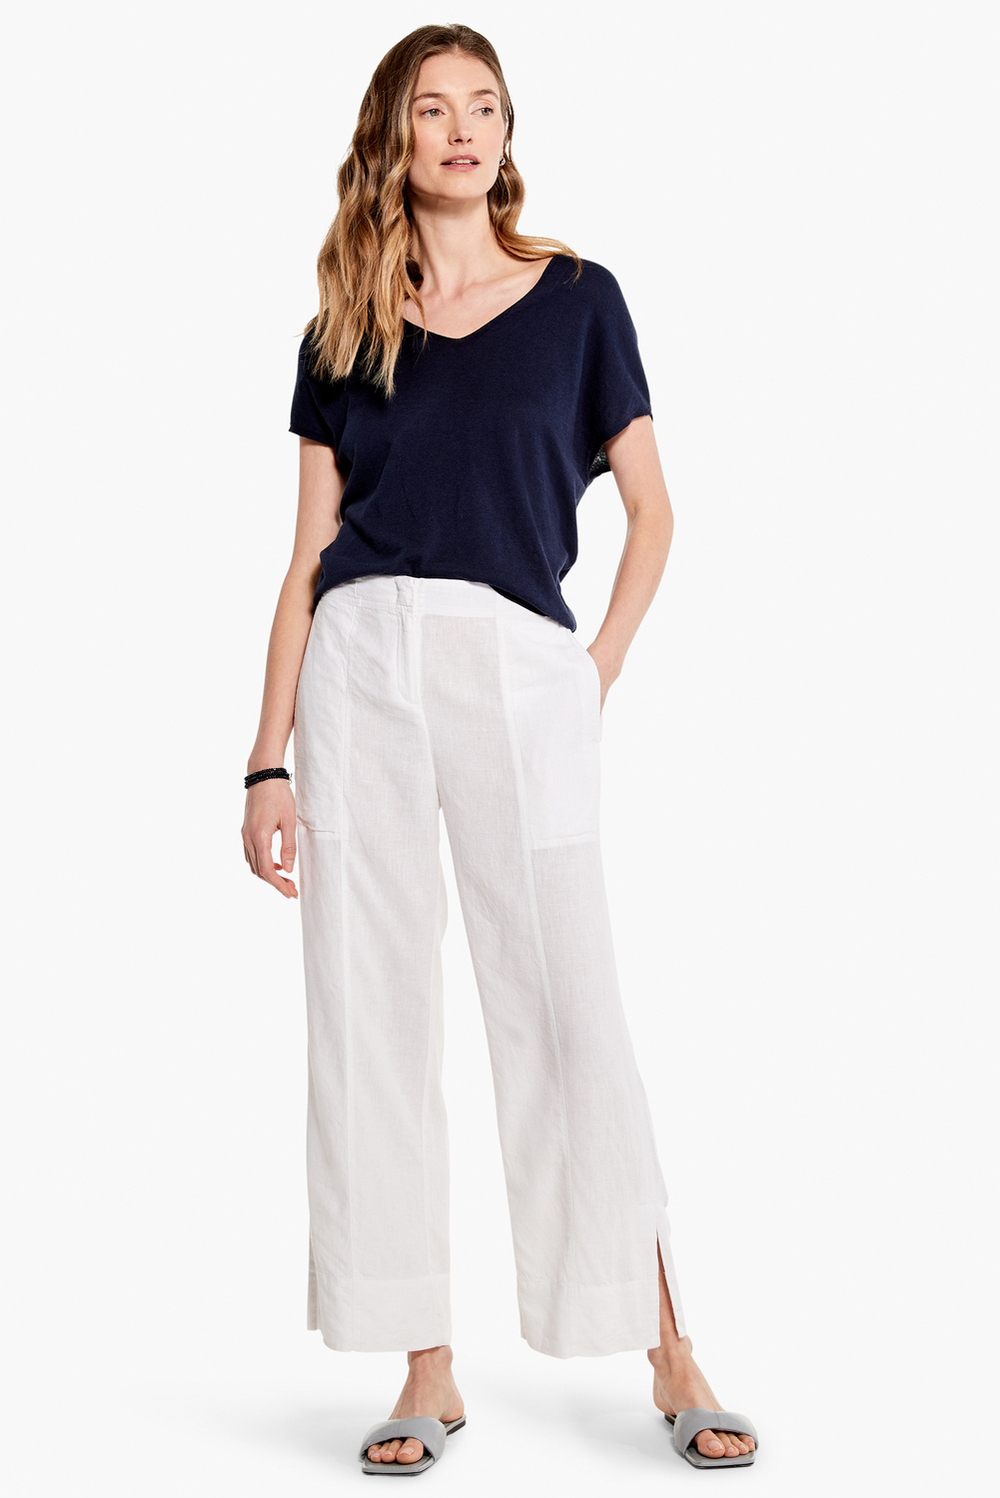 RUMBA PARK WIDE-LEG ANKLE PANT STYLE M231827. White